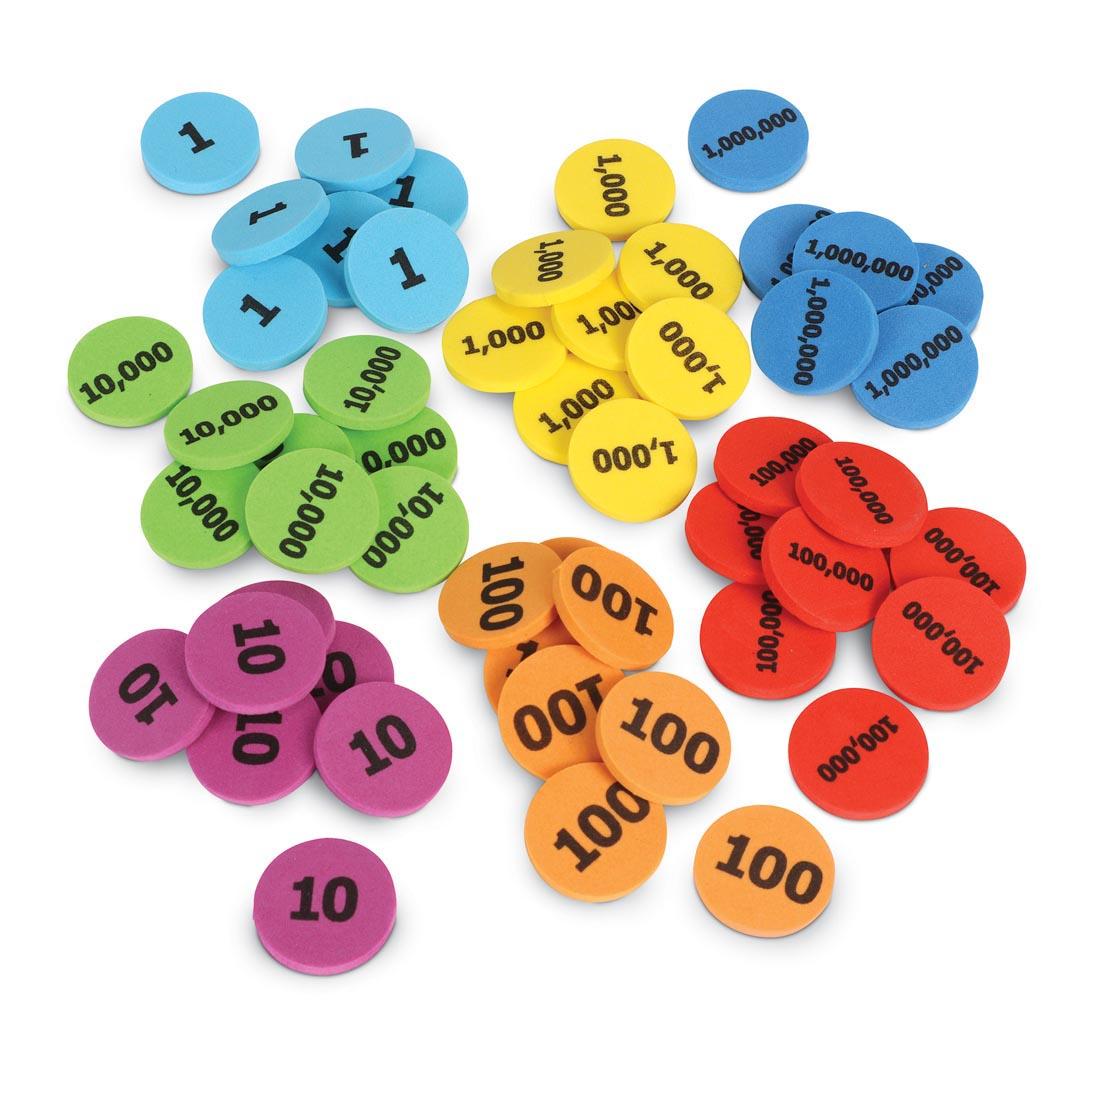 7 piles of Place Value Disks By Learning Resources